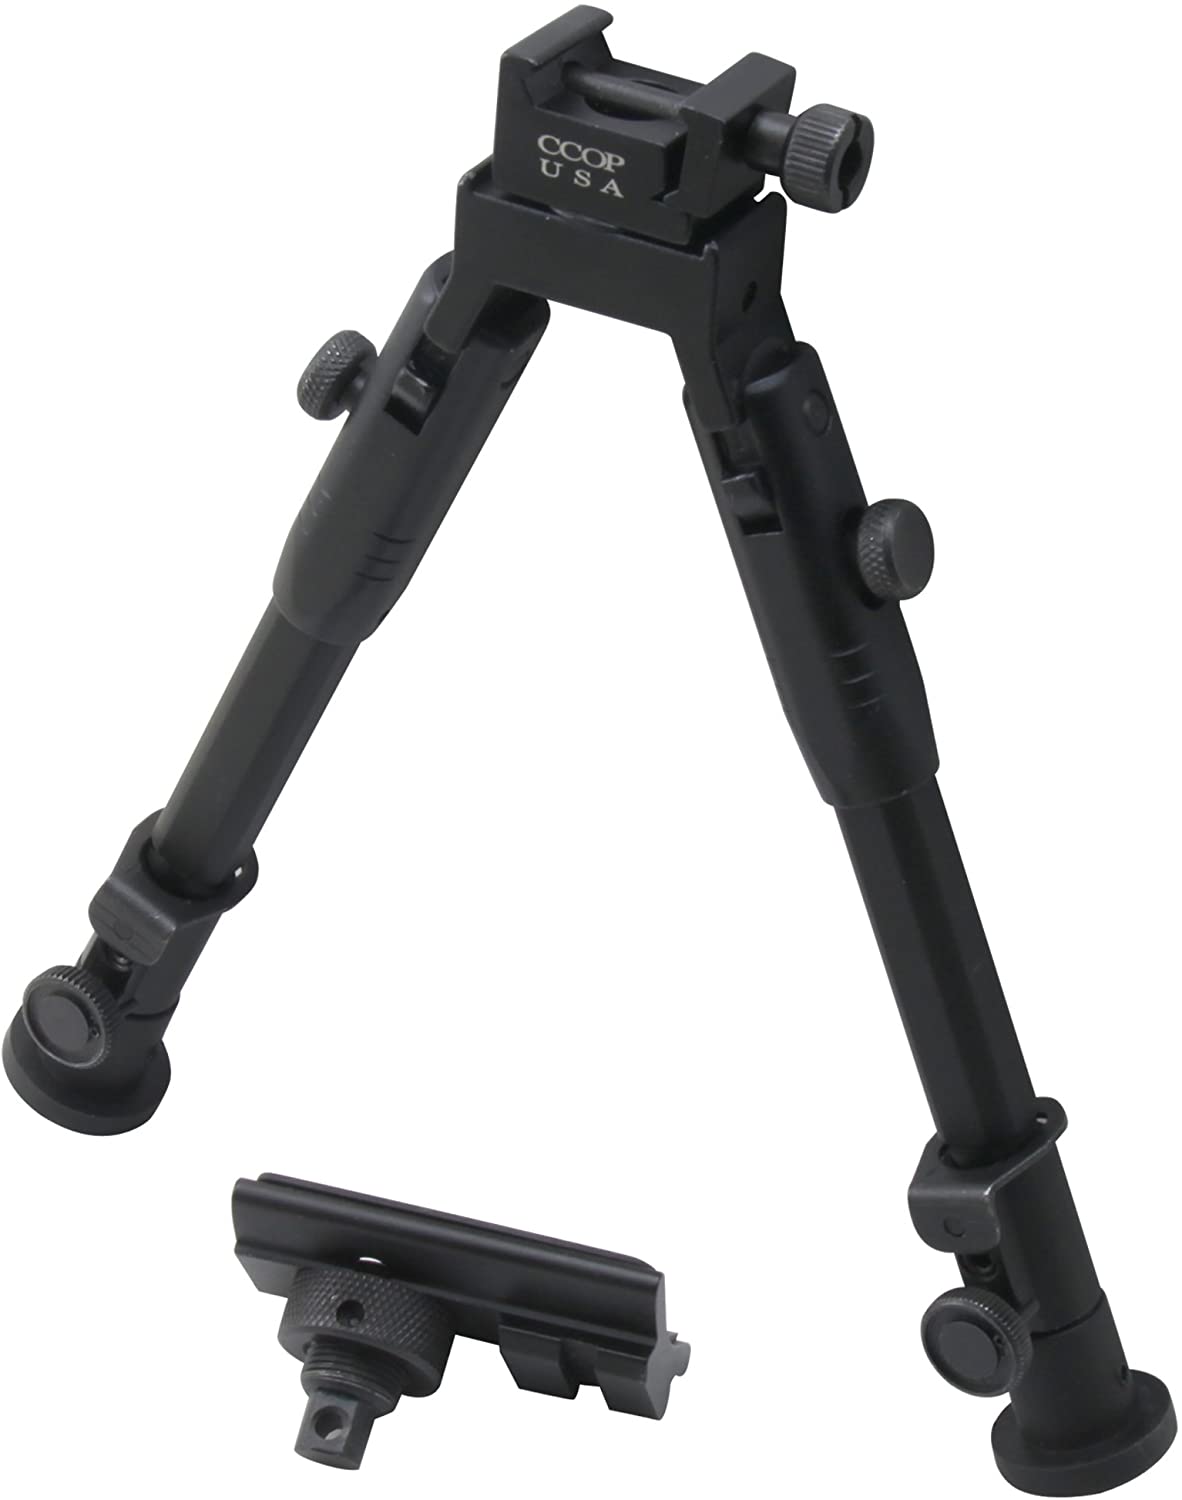 CCOP bipod 8.3 inch to 12.8 inches Inc Picatinny Attachment with Swivel Adaptor BP79M